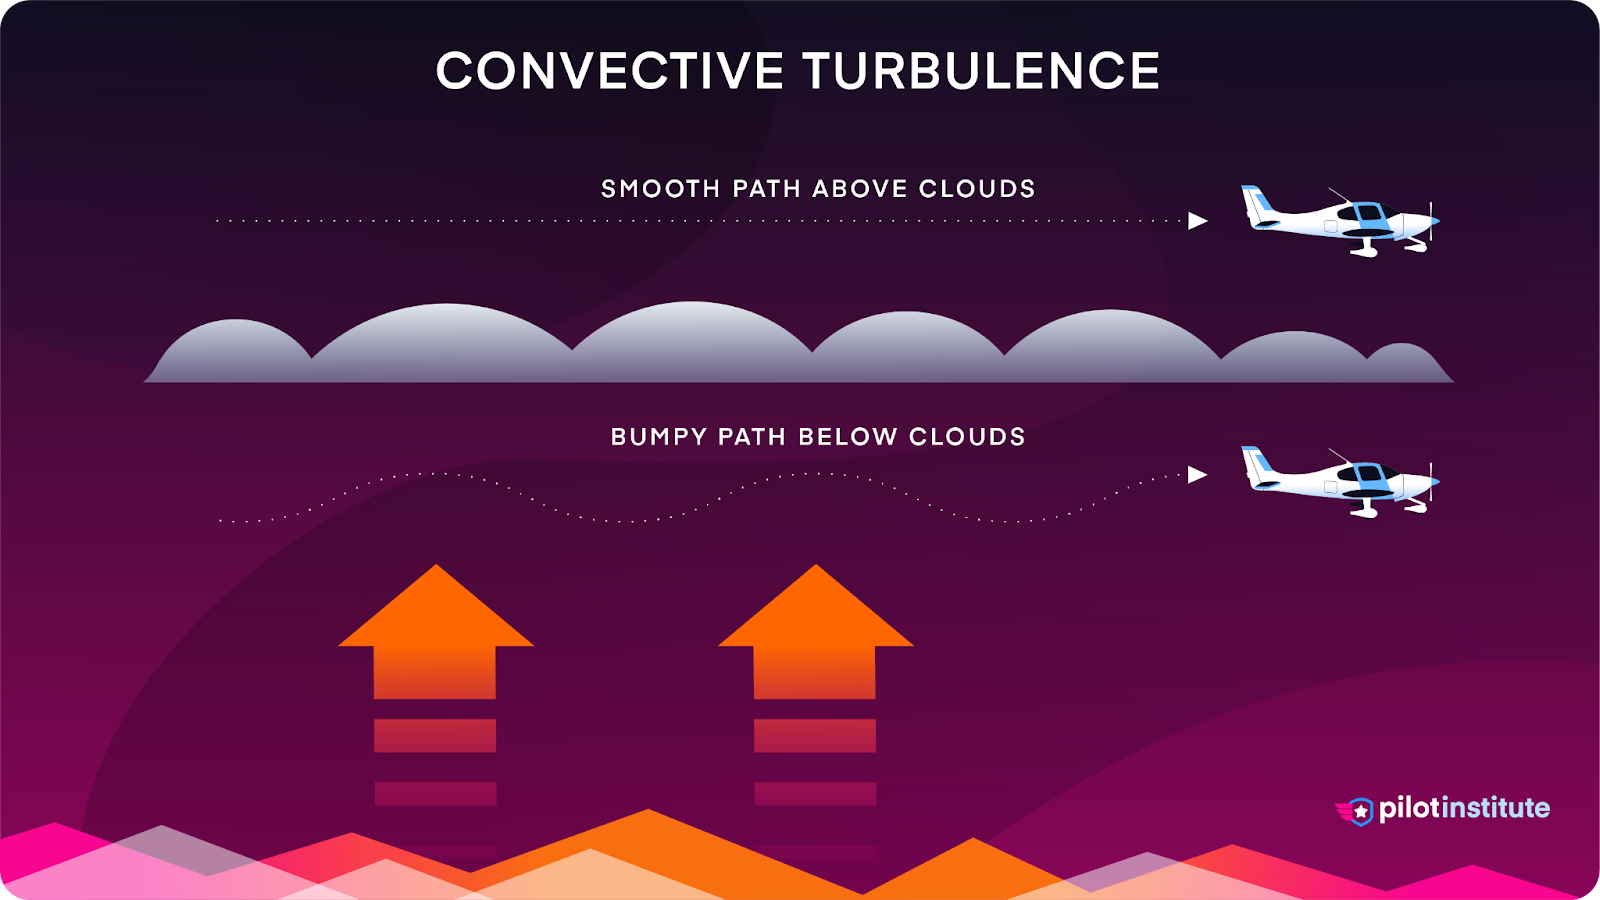 A diagram showing convective turbulence.